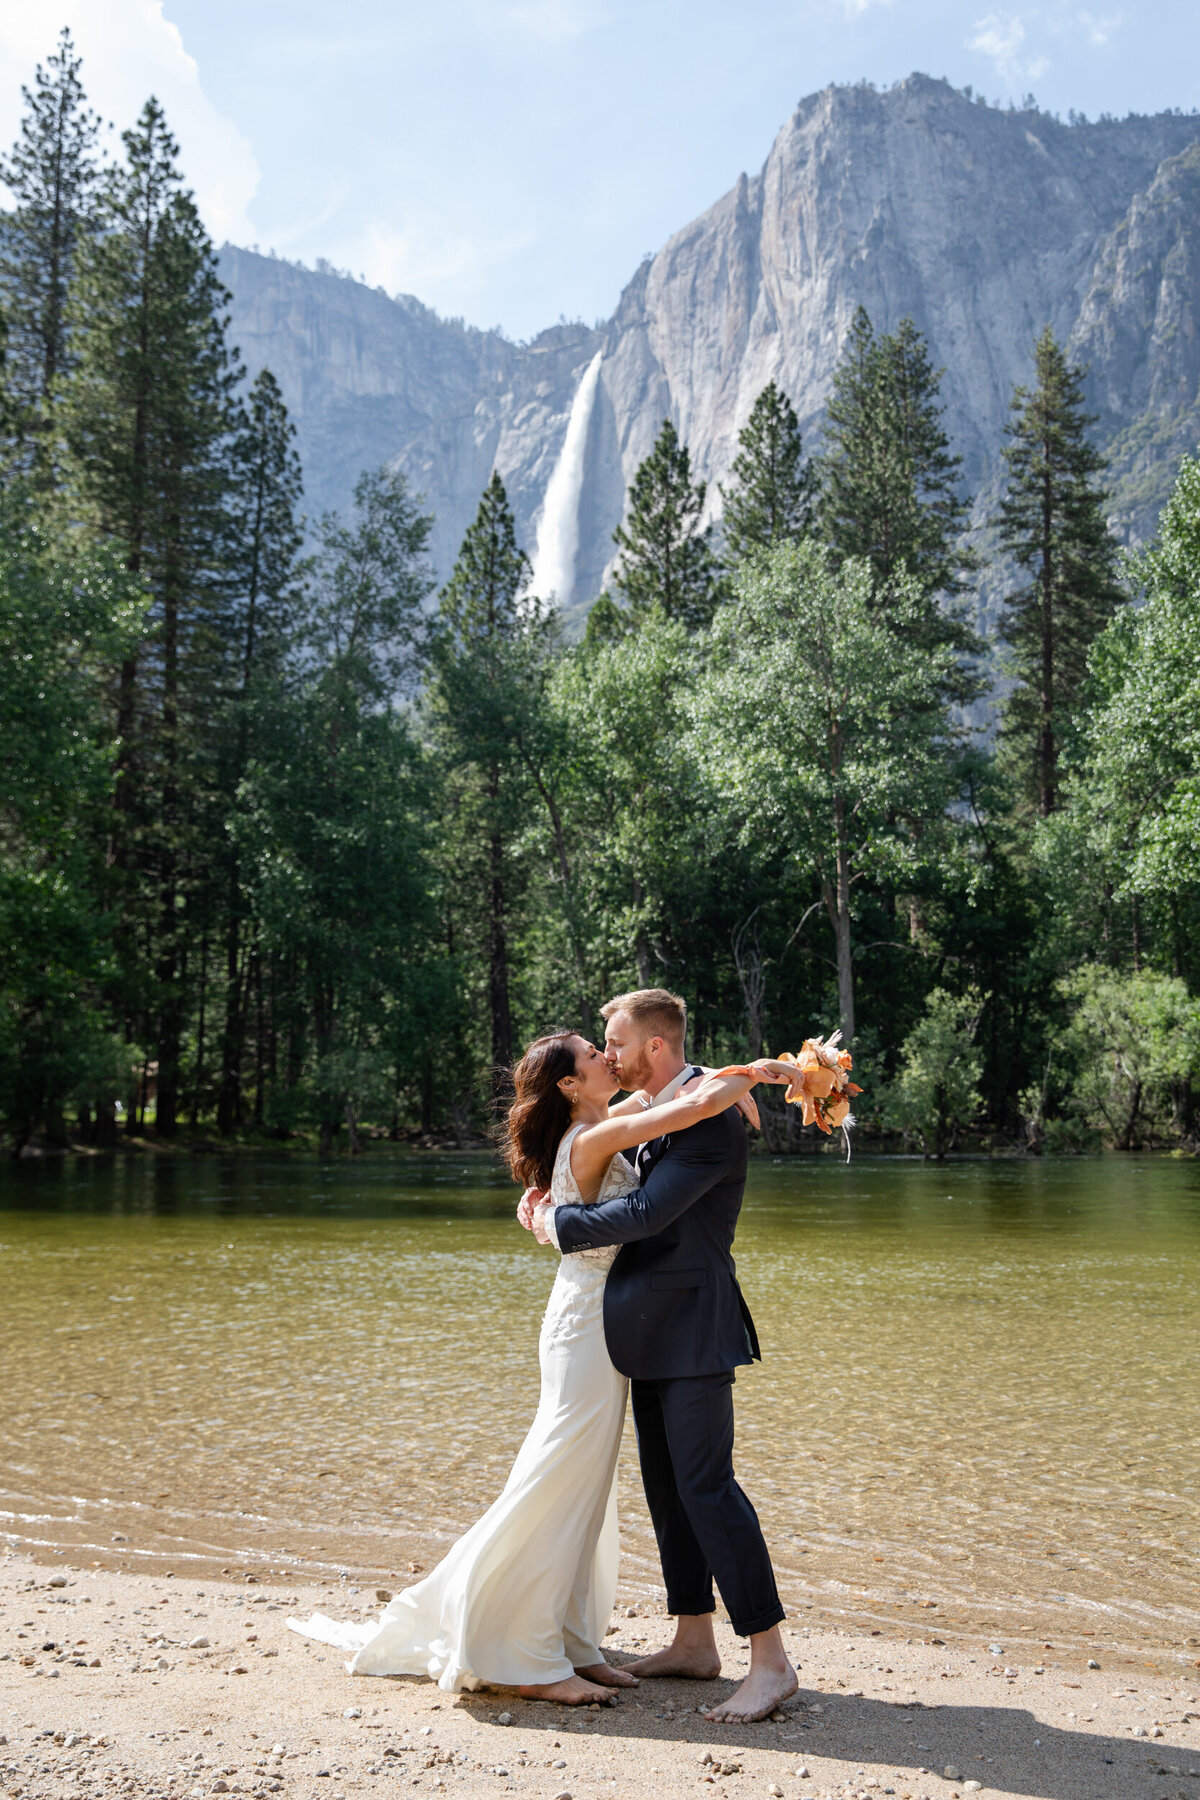 A bride and groom kiss next to the Merced River in Yosemite, California.